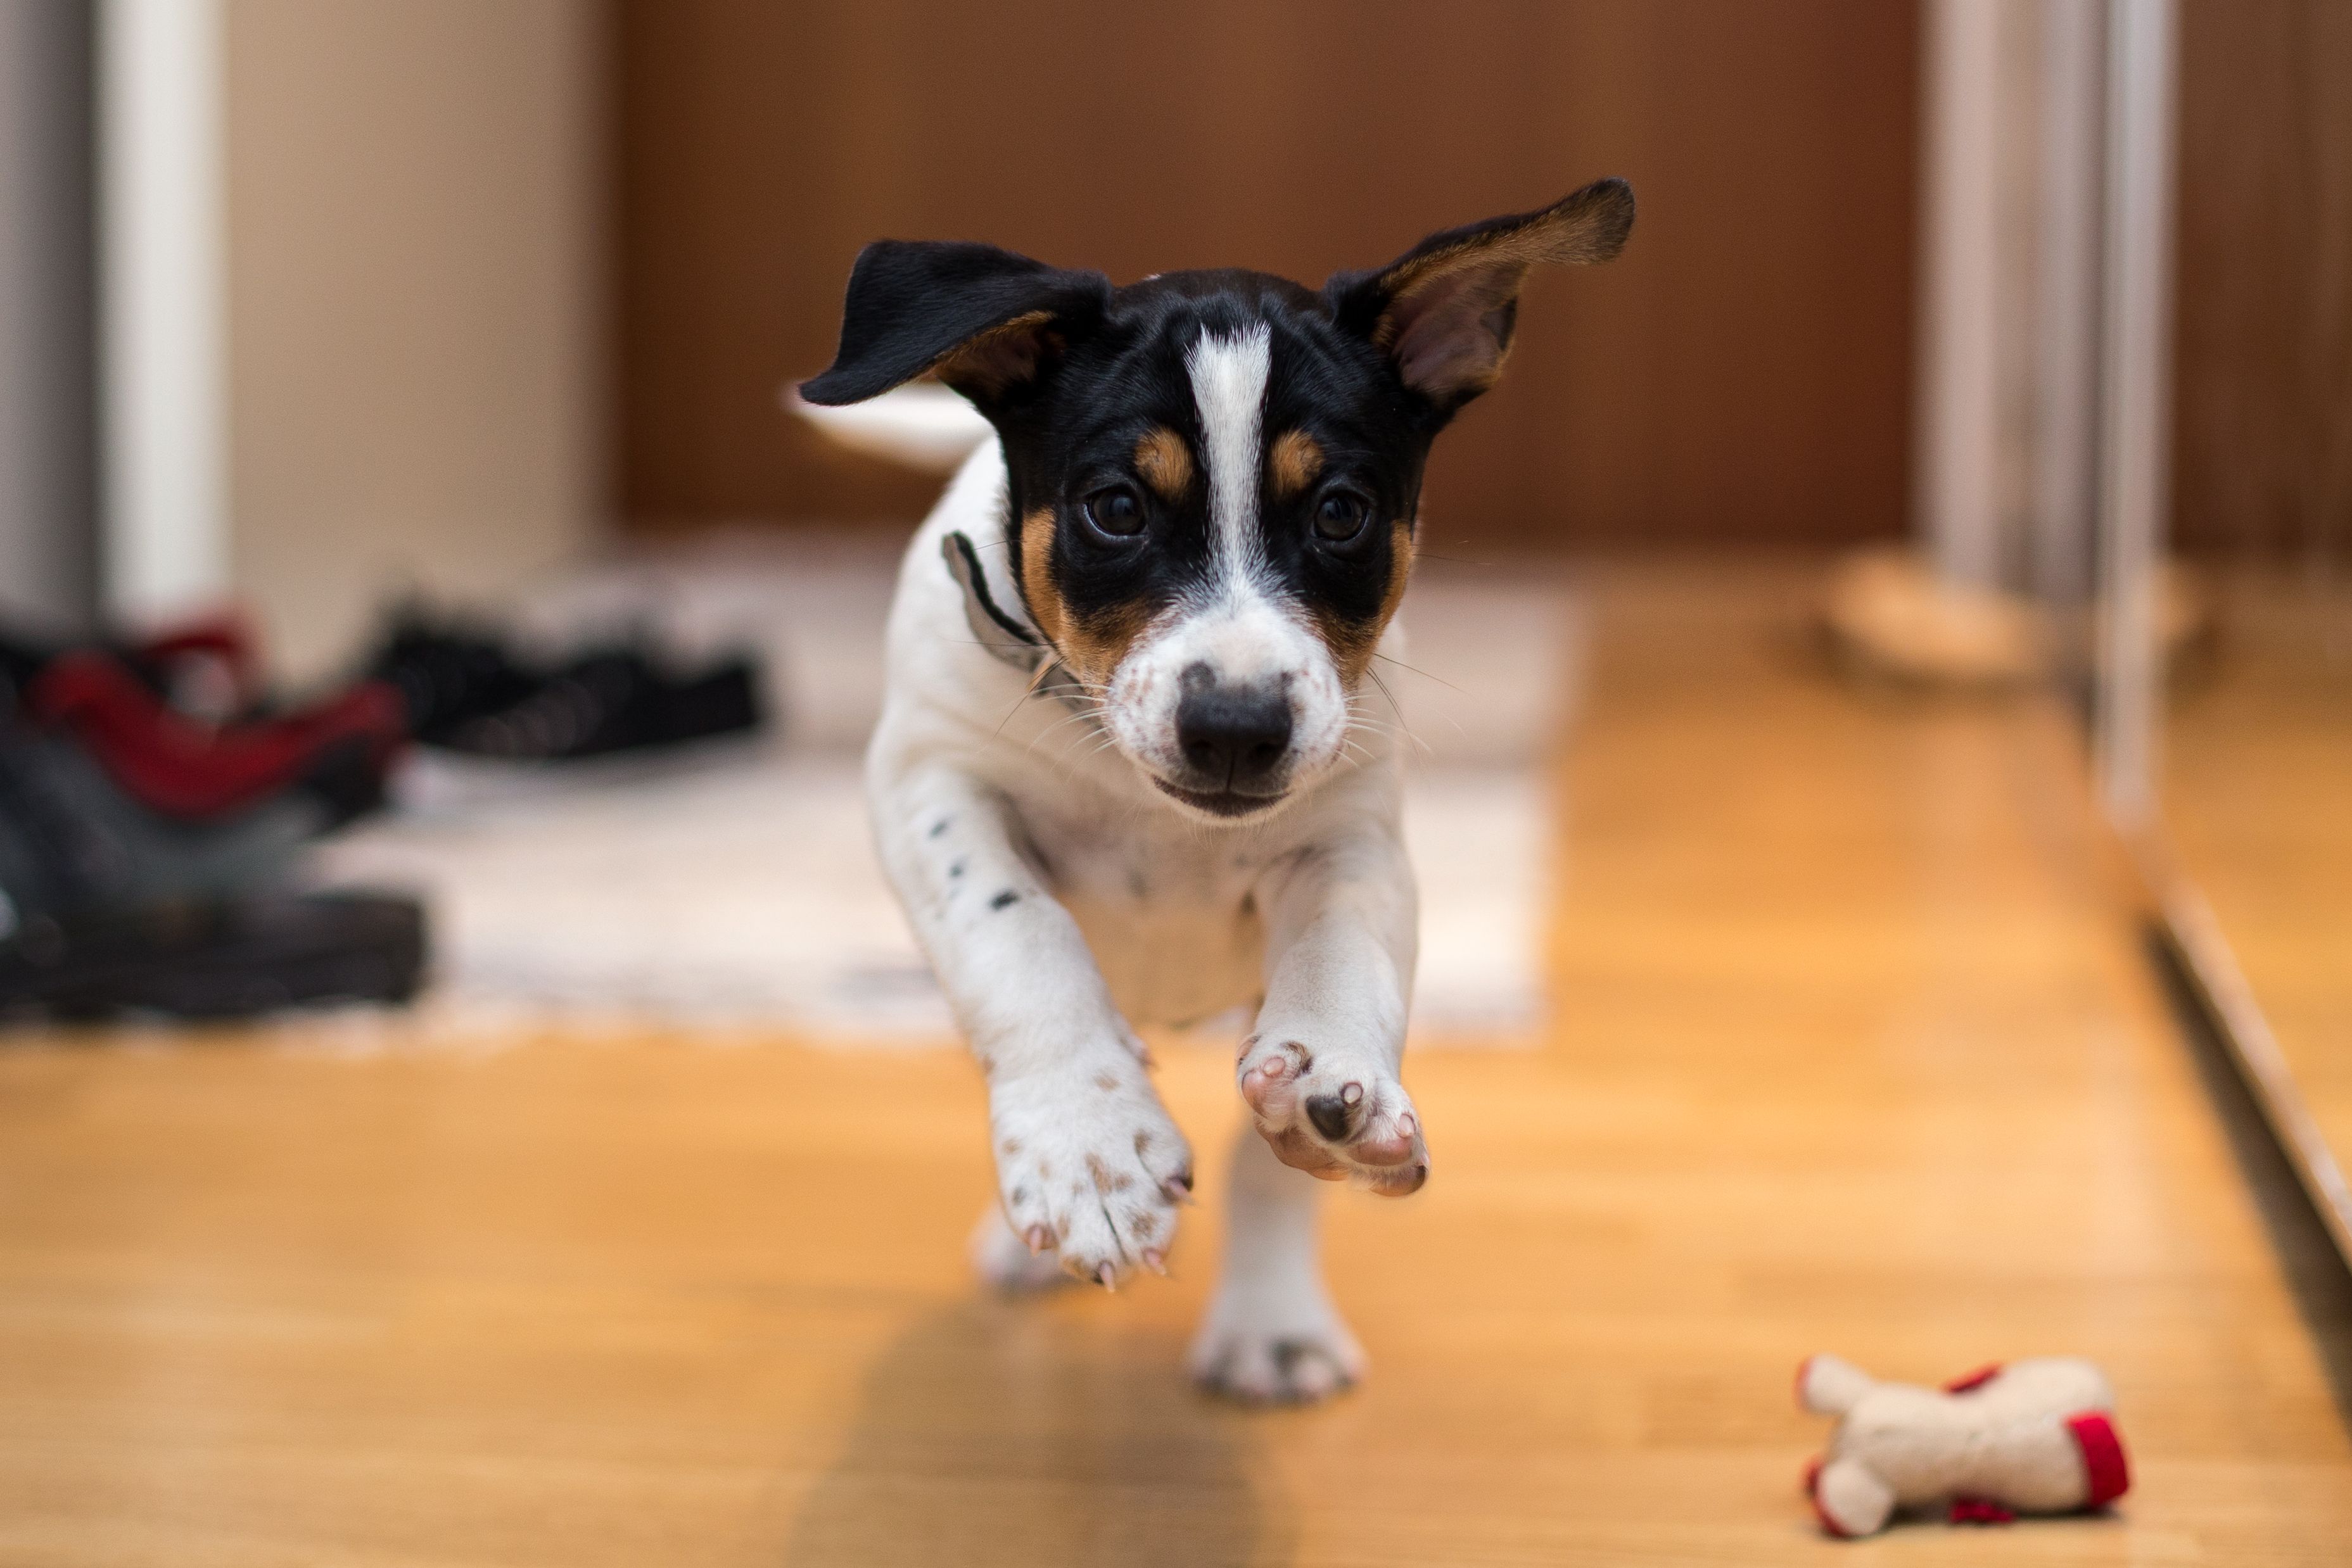 10 ways to engage your dog with indoor activities